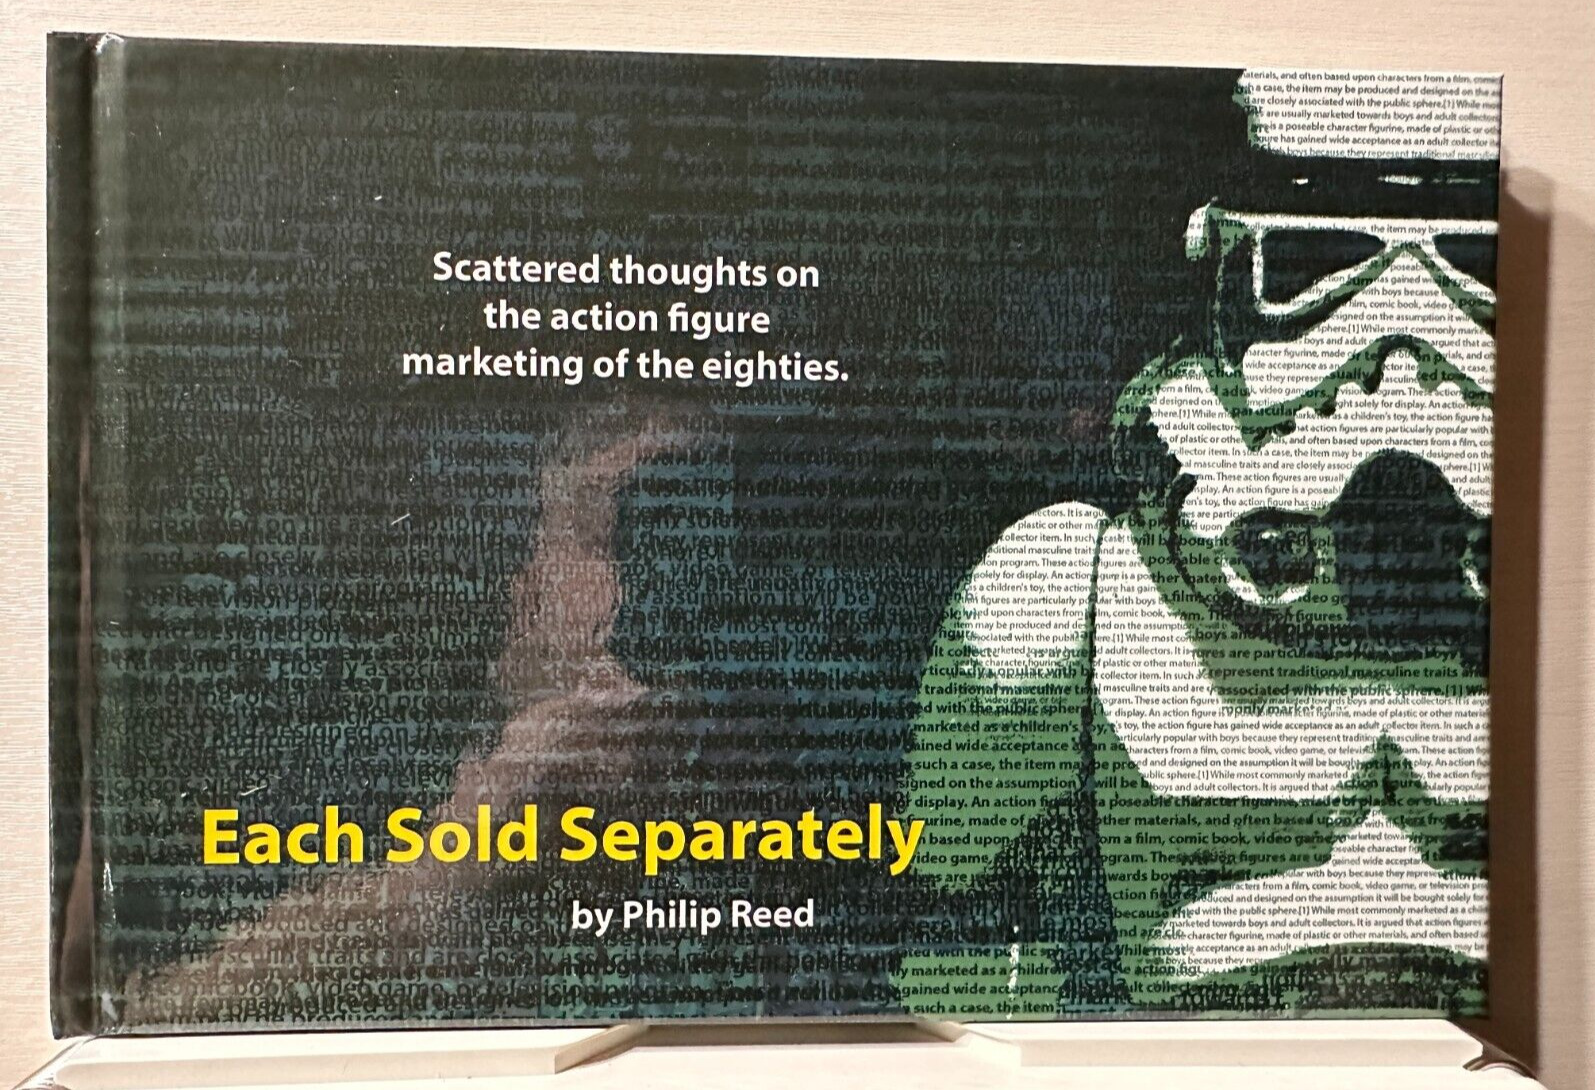 Each Sold Separately by Philip Reed / 1980s Action Figure Marketing Book